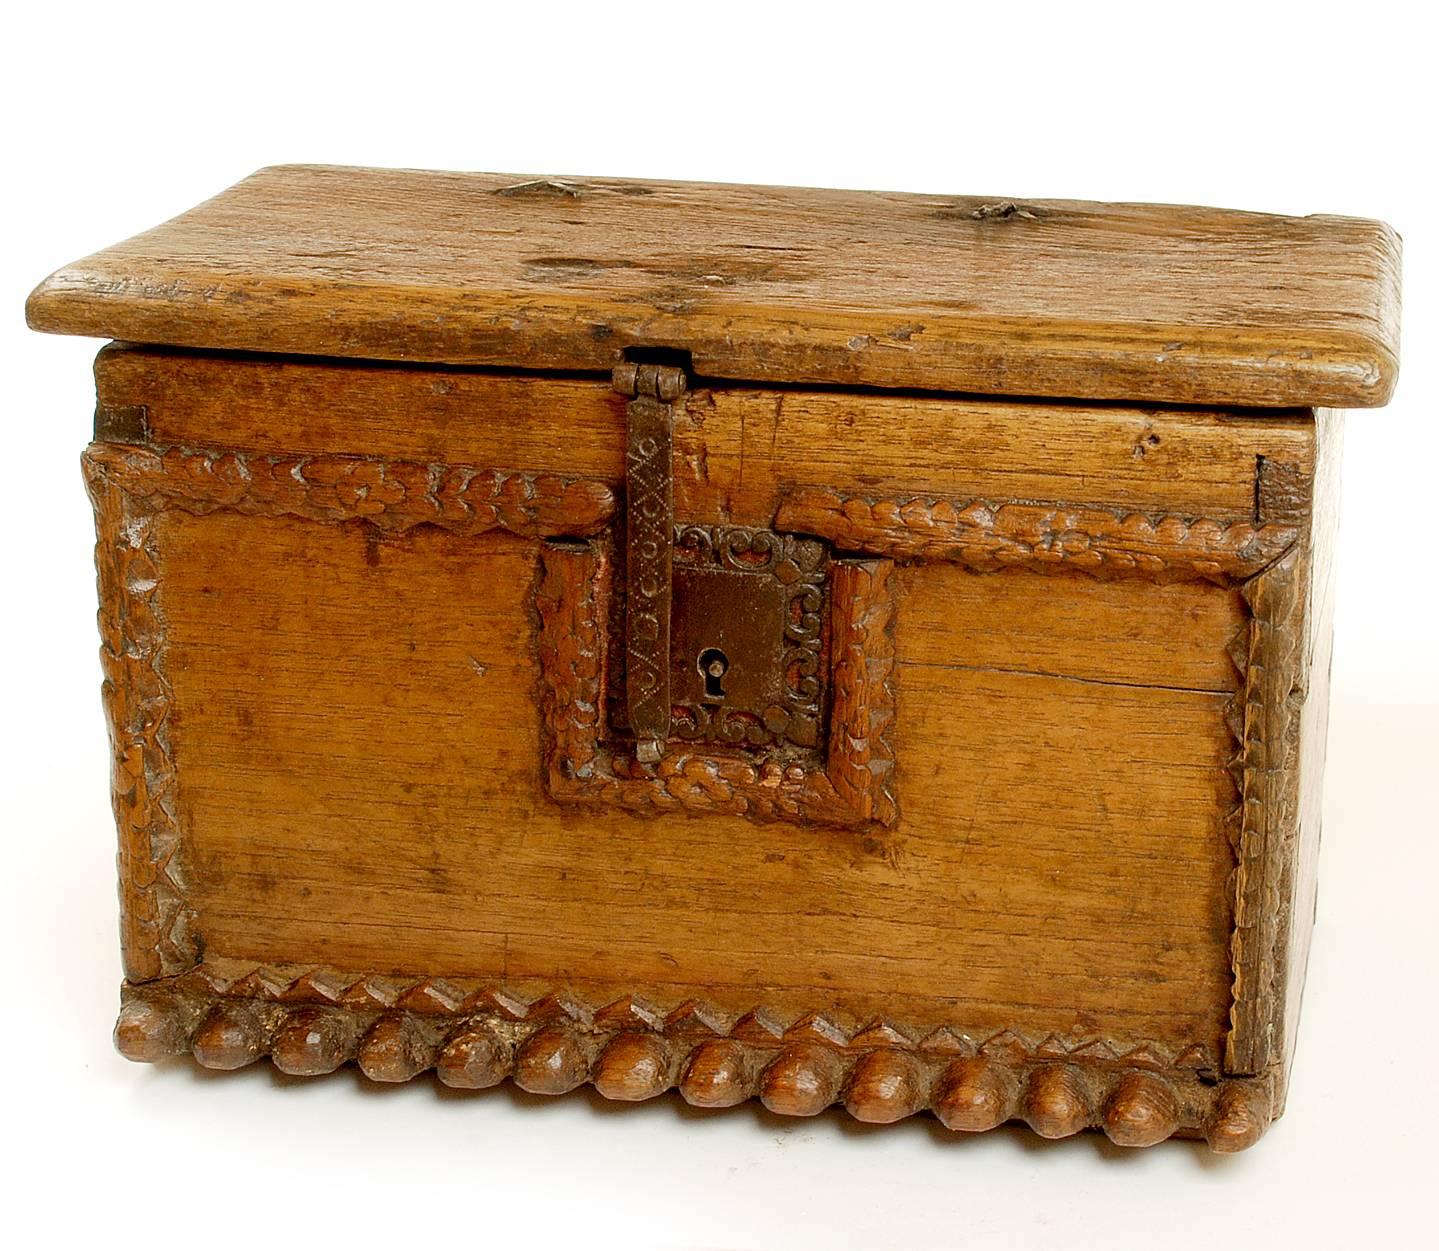 A good 18th century Spanish colonial 'scribe' box, or 'escribania' as it is known in Spanish -- for the storage of papers, ink and writing instruments. Red cedar with hand carved cedar wood moldings, iron lock-plate and a small, quasi secret